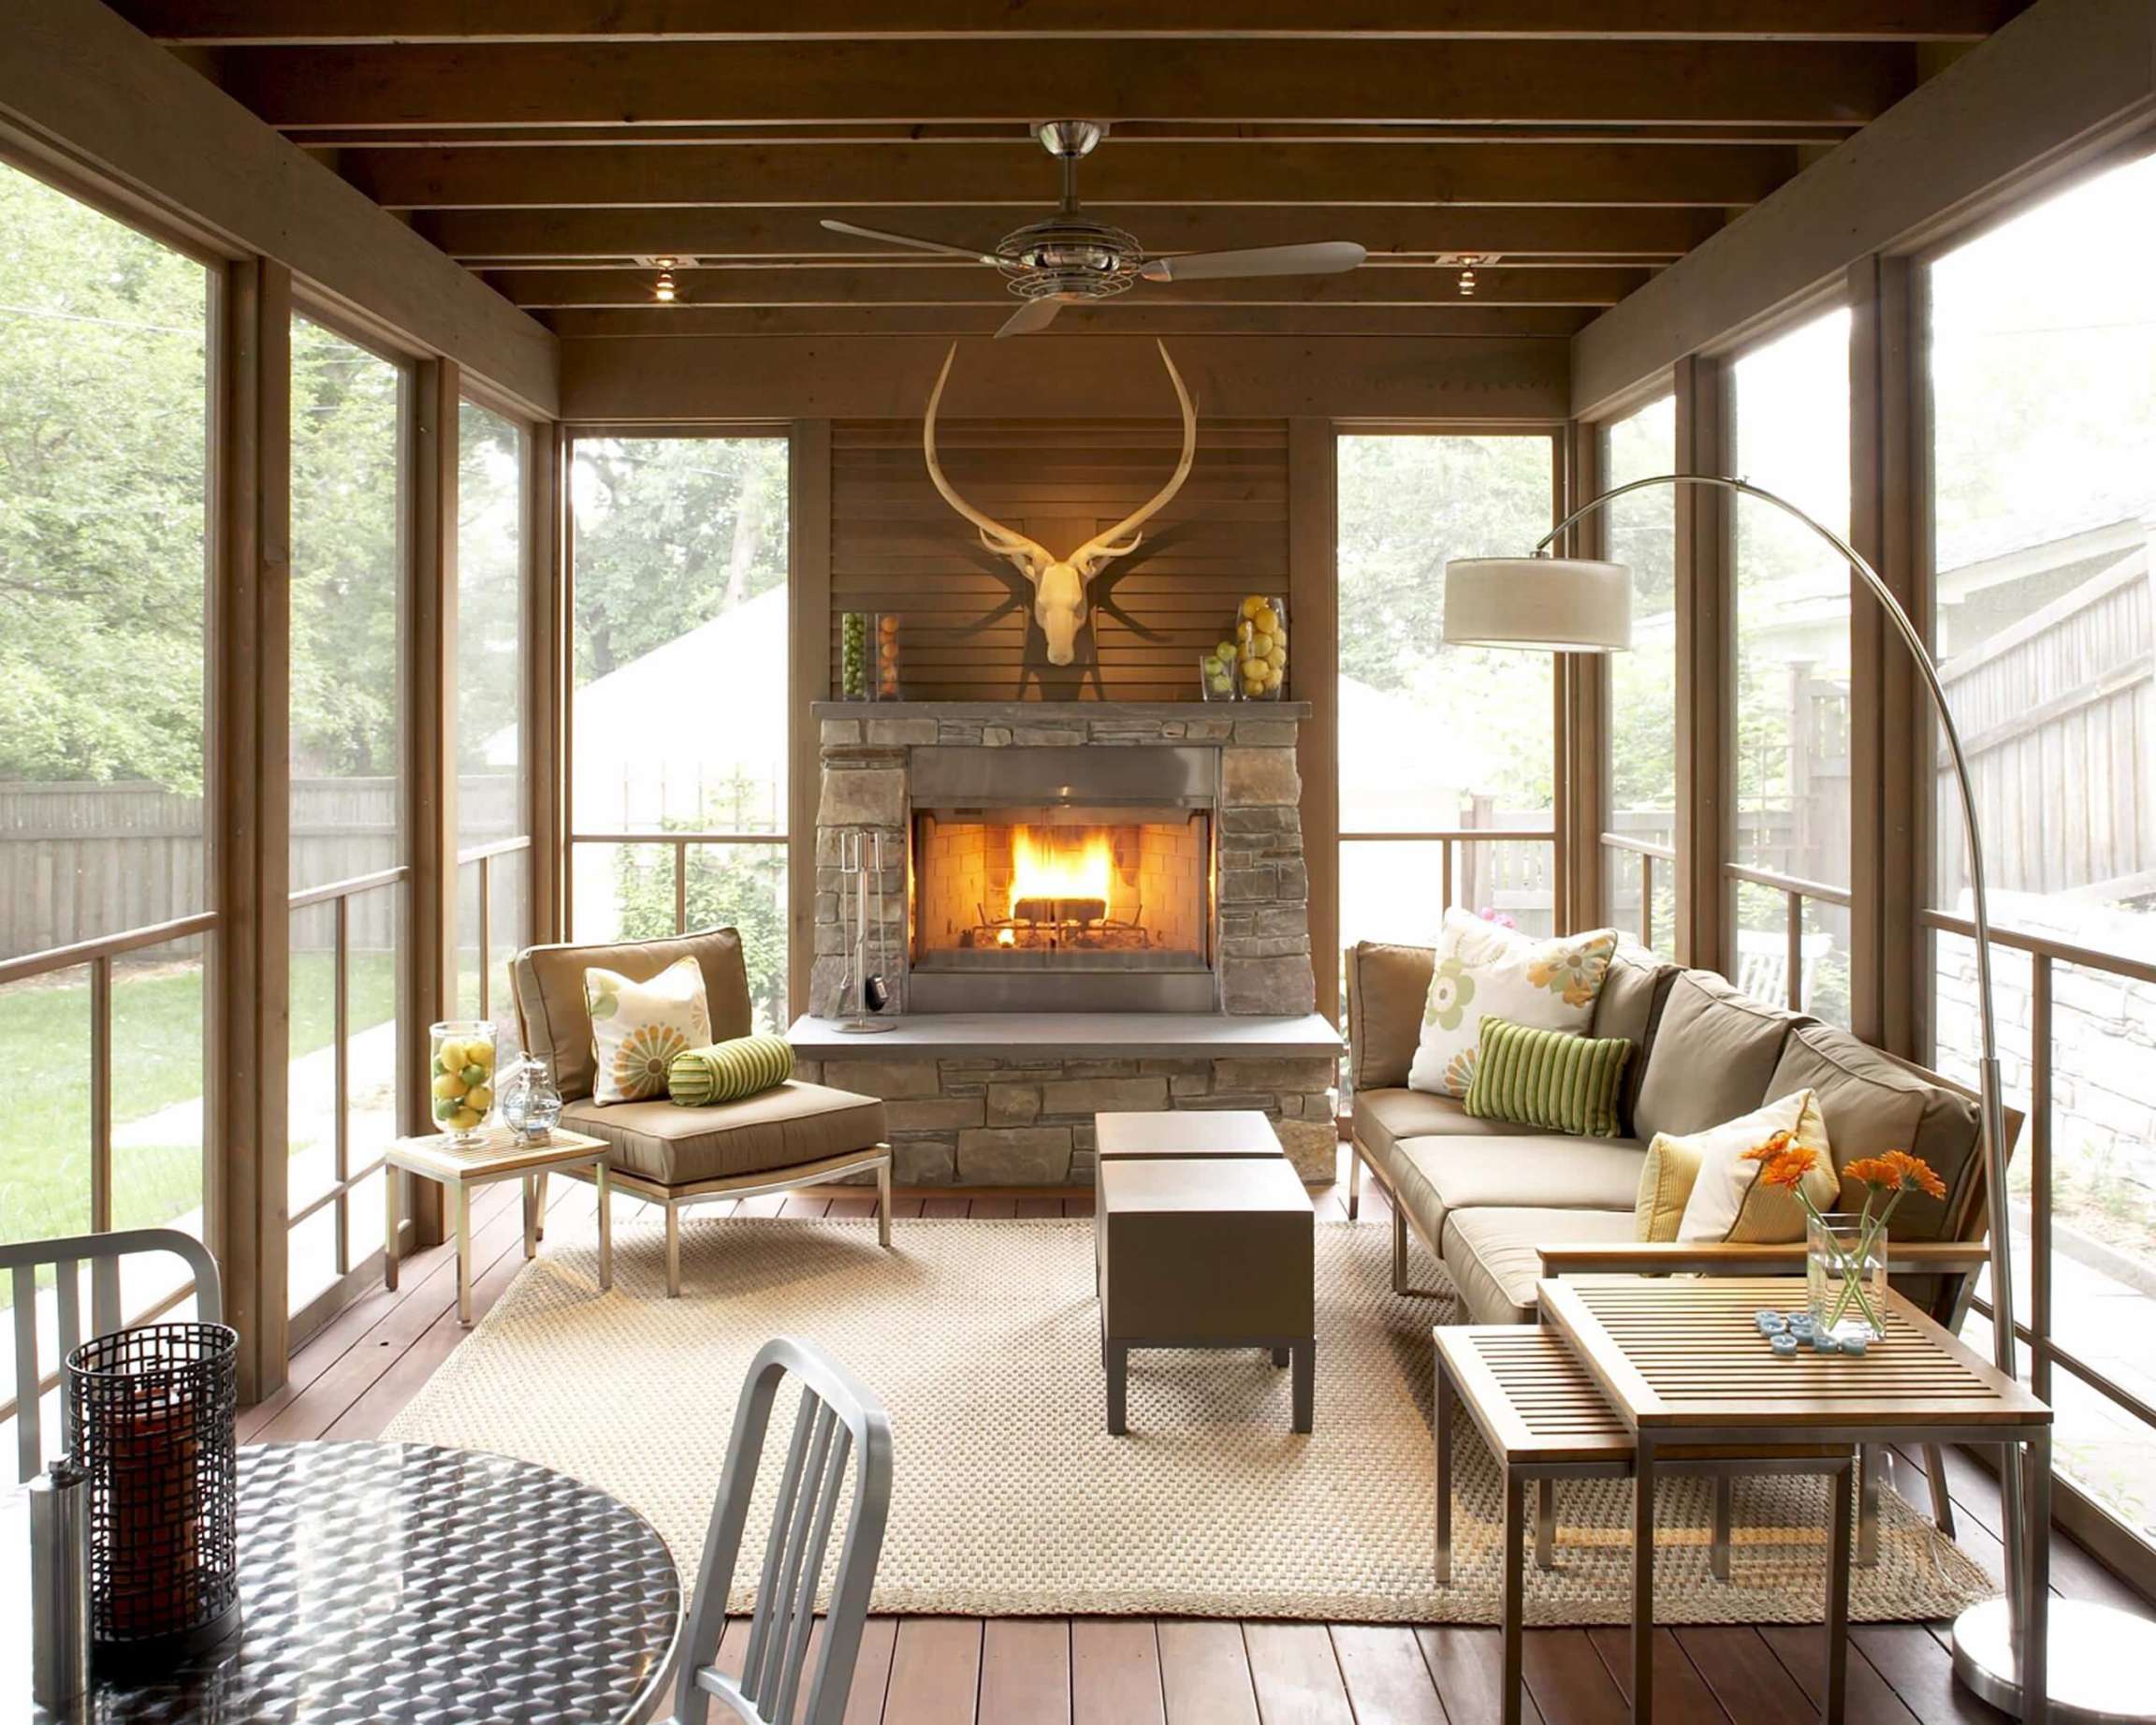 Enclosed Porch With Fireplace - Photos & Ideas  Houzz